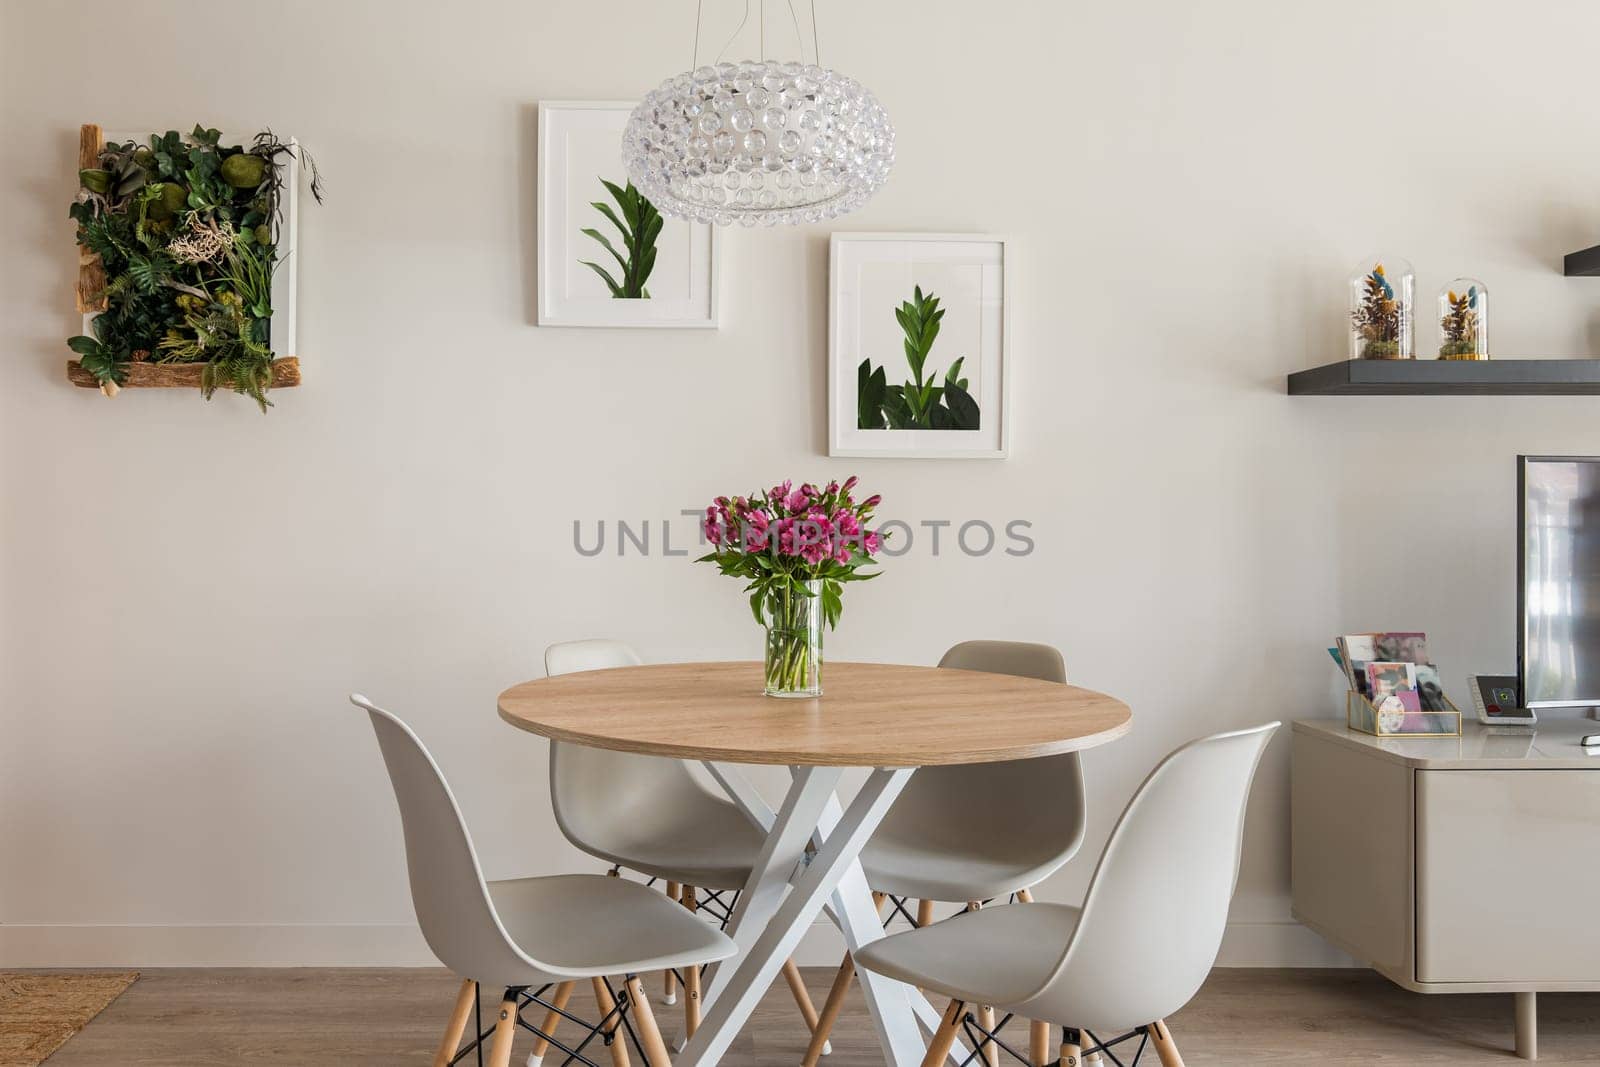 Cozy stylish living room with a round dining table, chairs and TV with decorative accessories on the shelves. The concept of a modern city apartment in a mortgage.